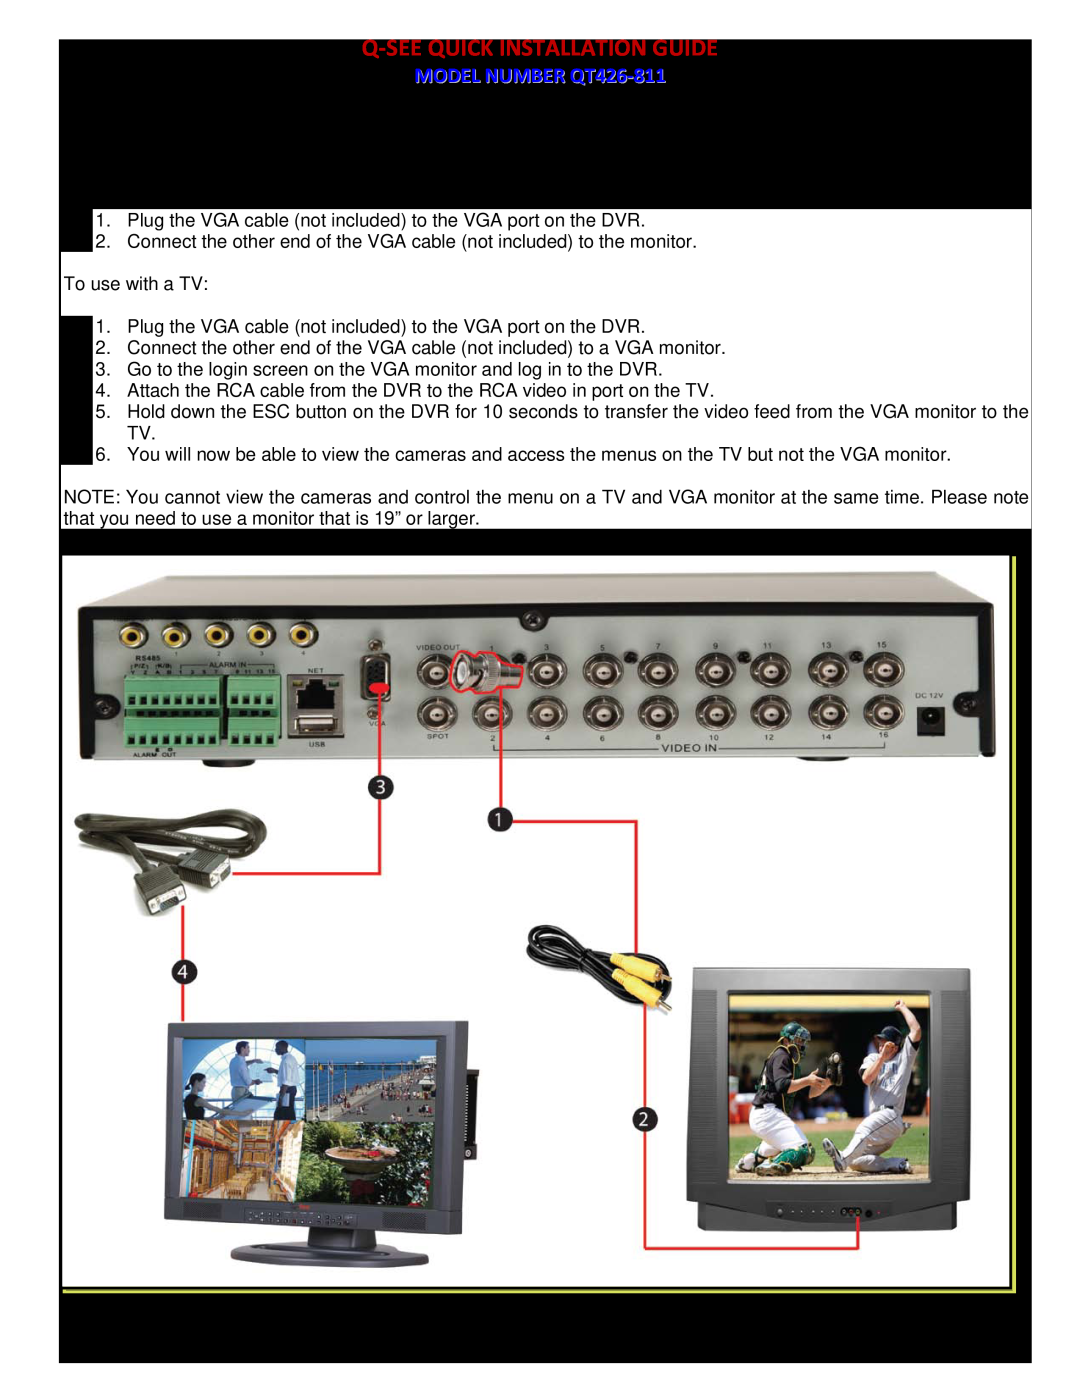 Q-See QT428-811 PART 3 - CONNECTING THE DVR TO YOUR TV, P a g e, Q-See Quick Installation Guide, MODEL NUMBER QT426-811 